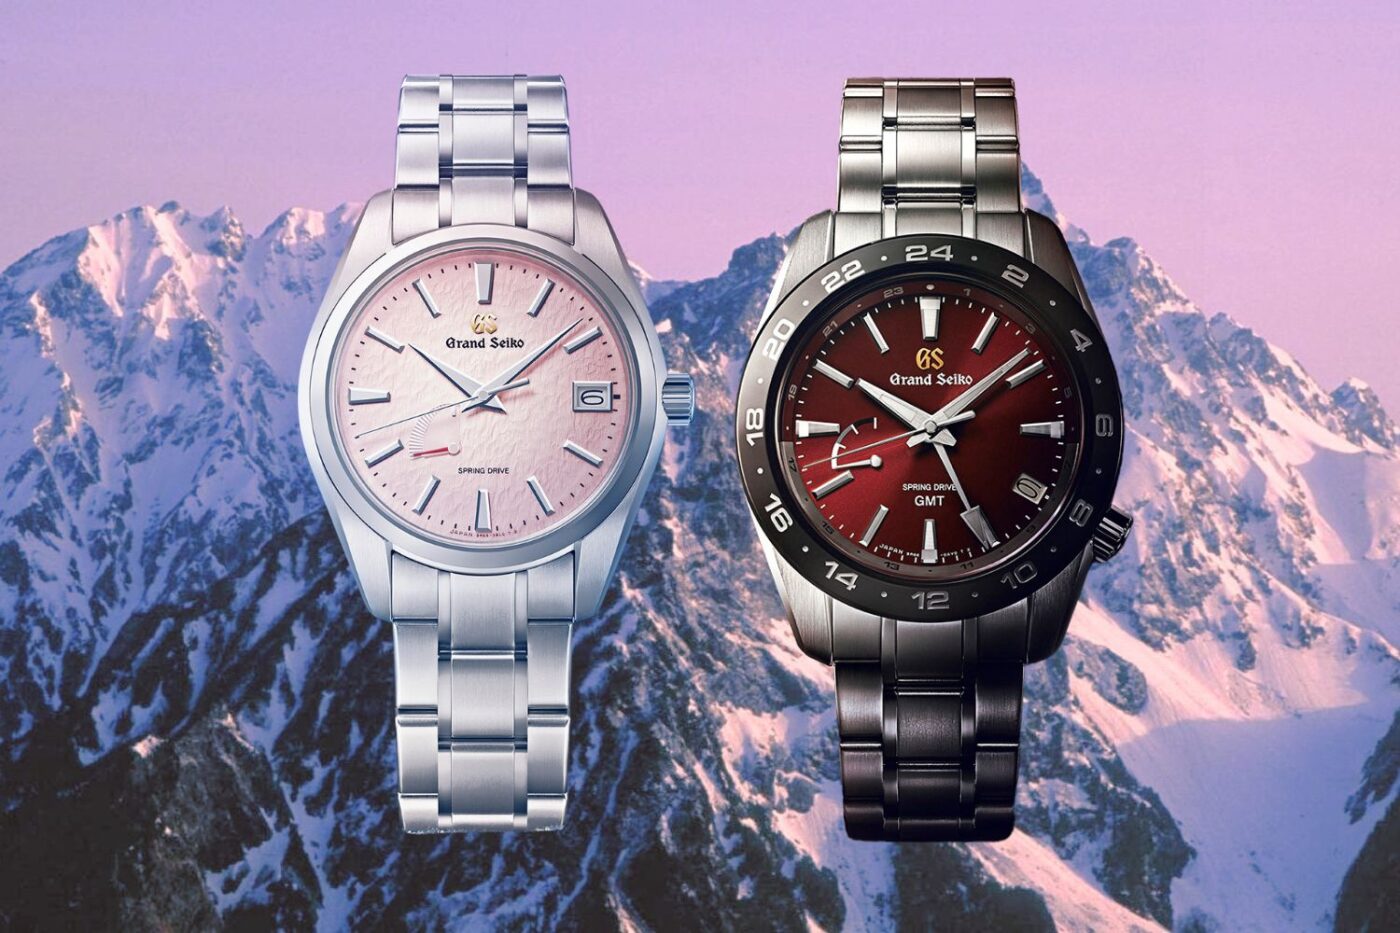 Wake Up To The Japanese Sunrise With Grand Seiko’s 20th Anniversary Release